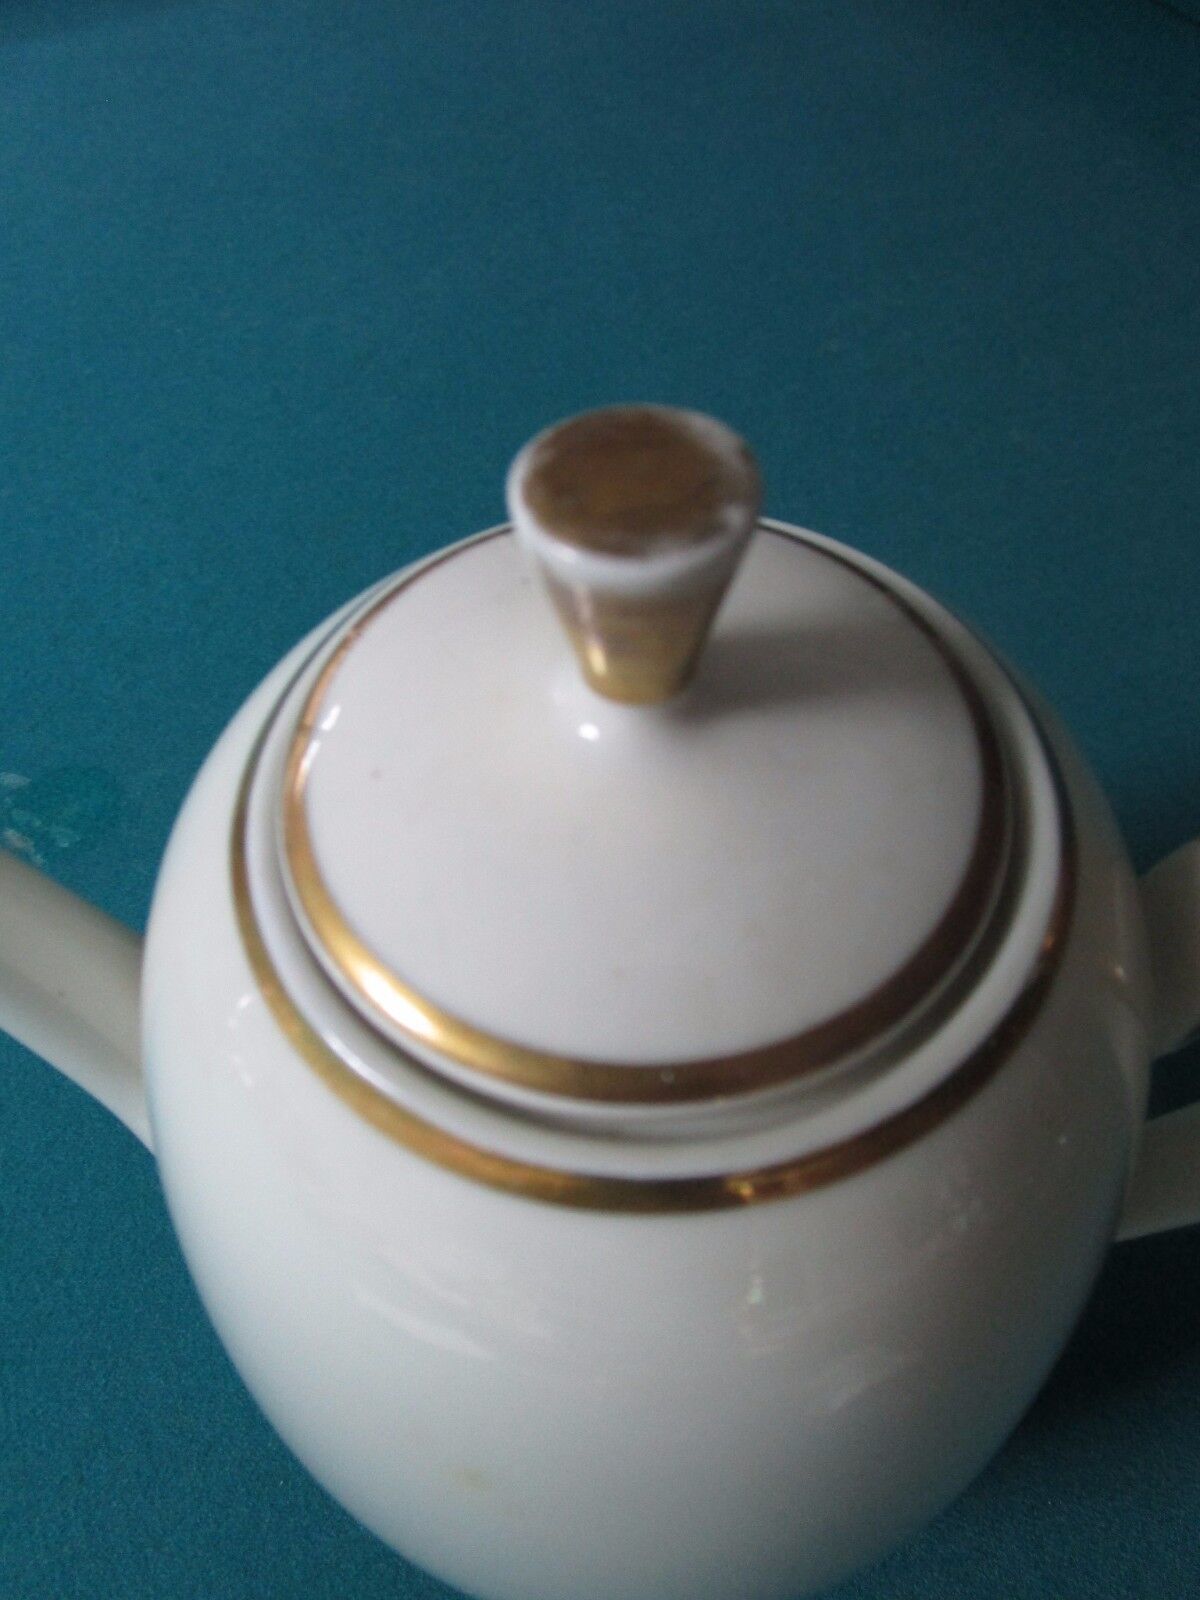 Primary image for GERBRUDER  WINTERLING -COFFEE POT # 40, Schwarzenbach, Germany c1940s GOLD RIM